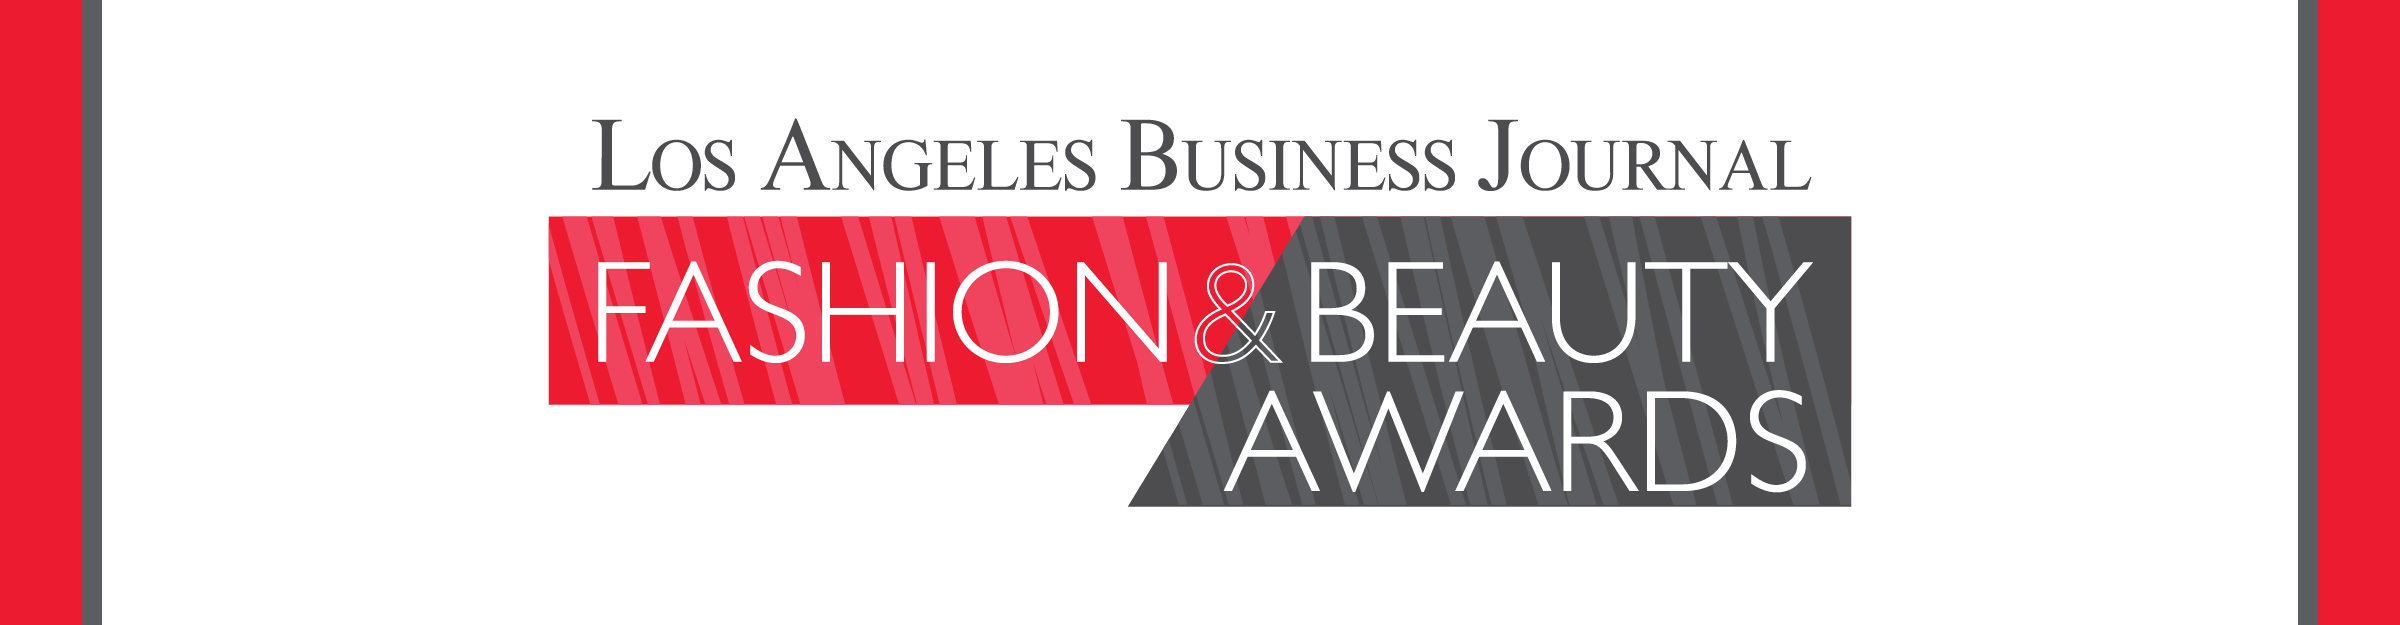 Los Angeles Business Journal Fashion & Beauty Awards Event Banner